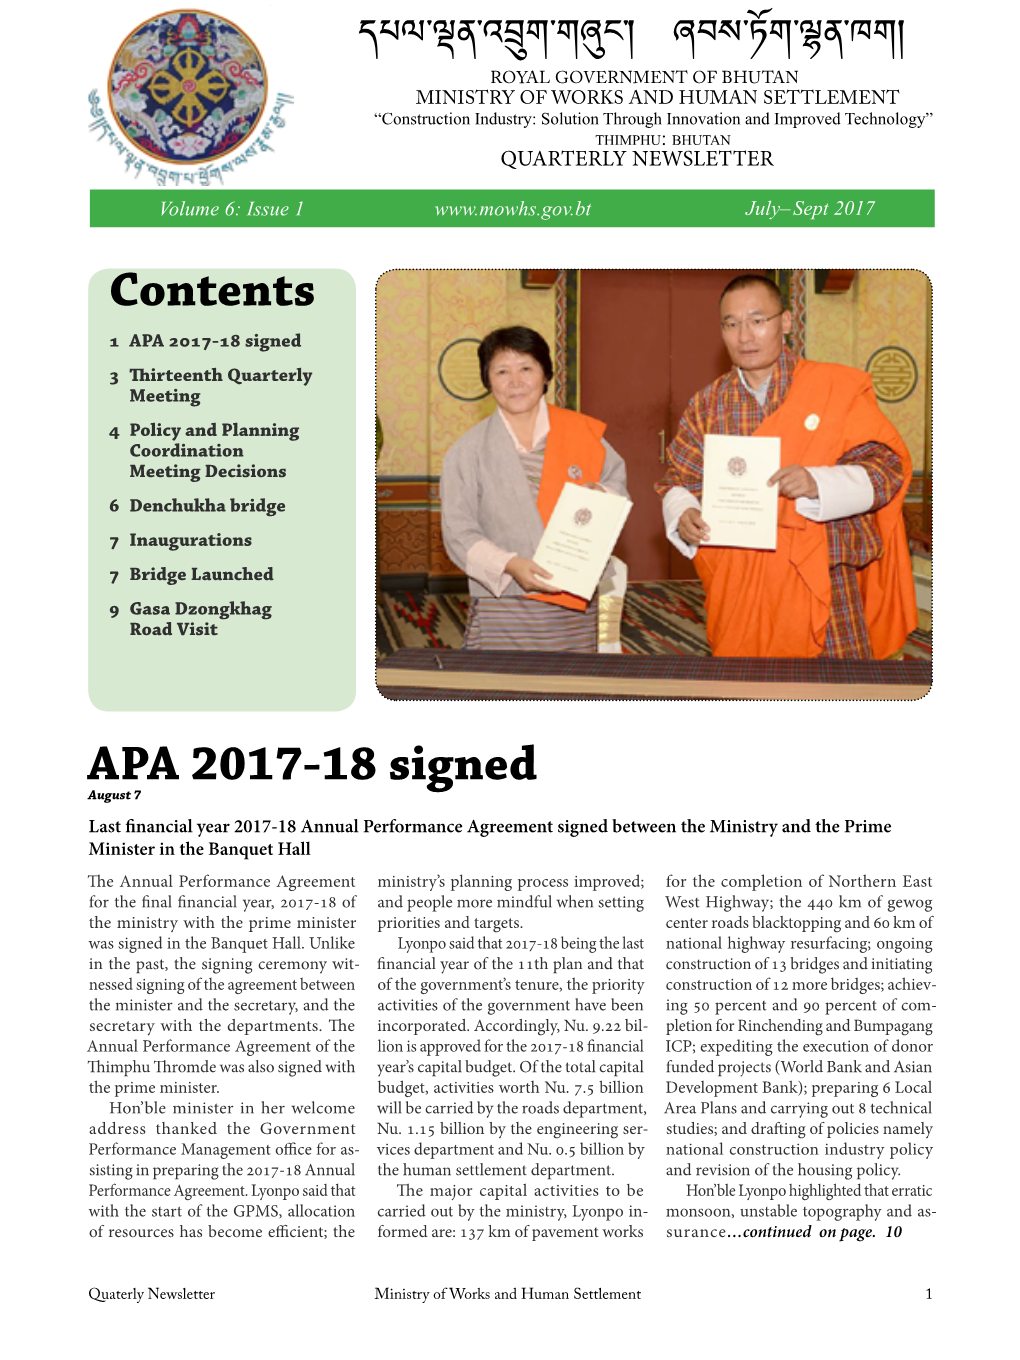 APA 2017-18 Signed Contents